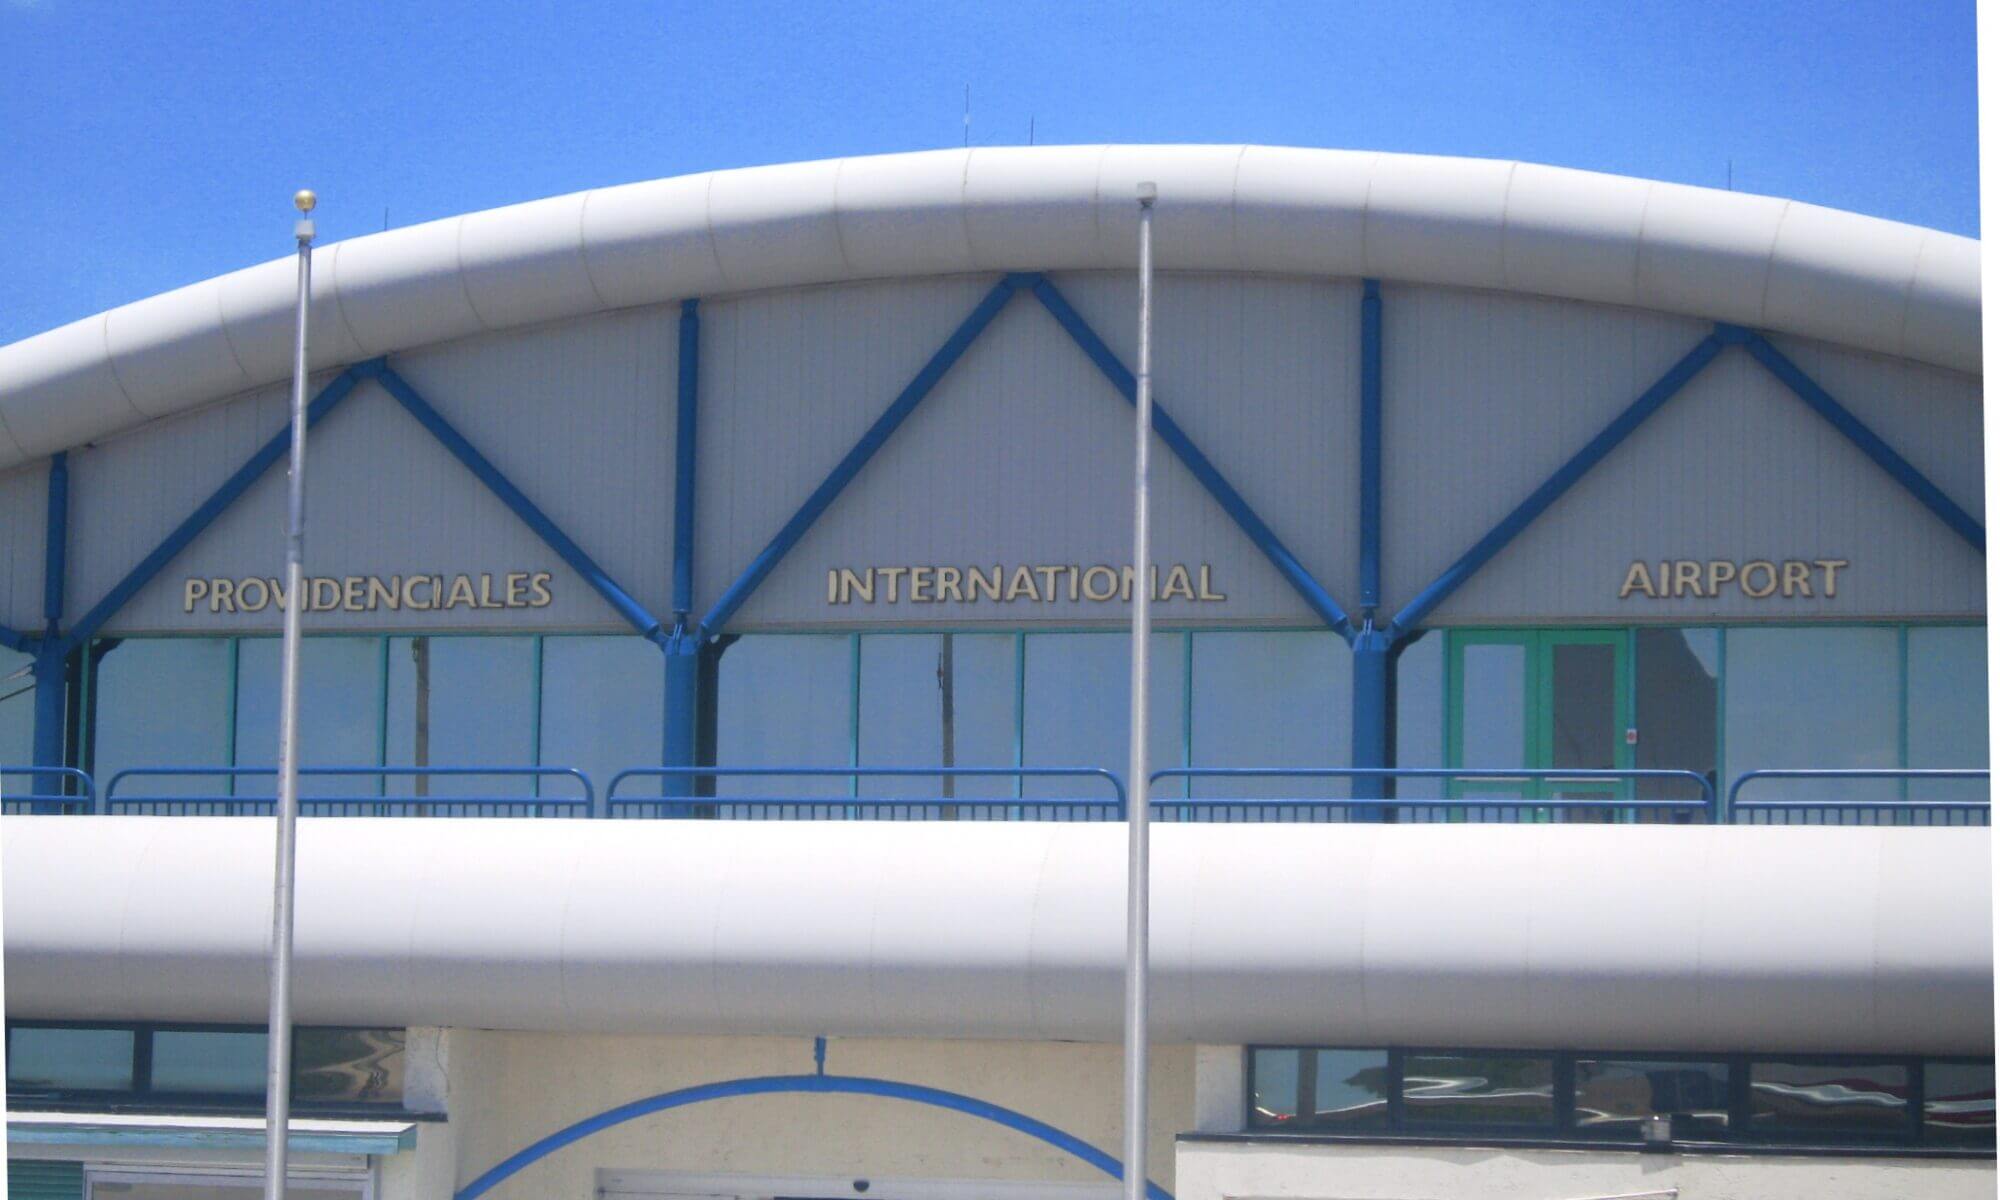 Providenciales airport